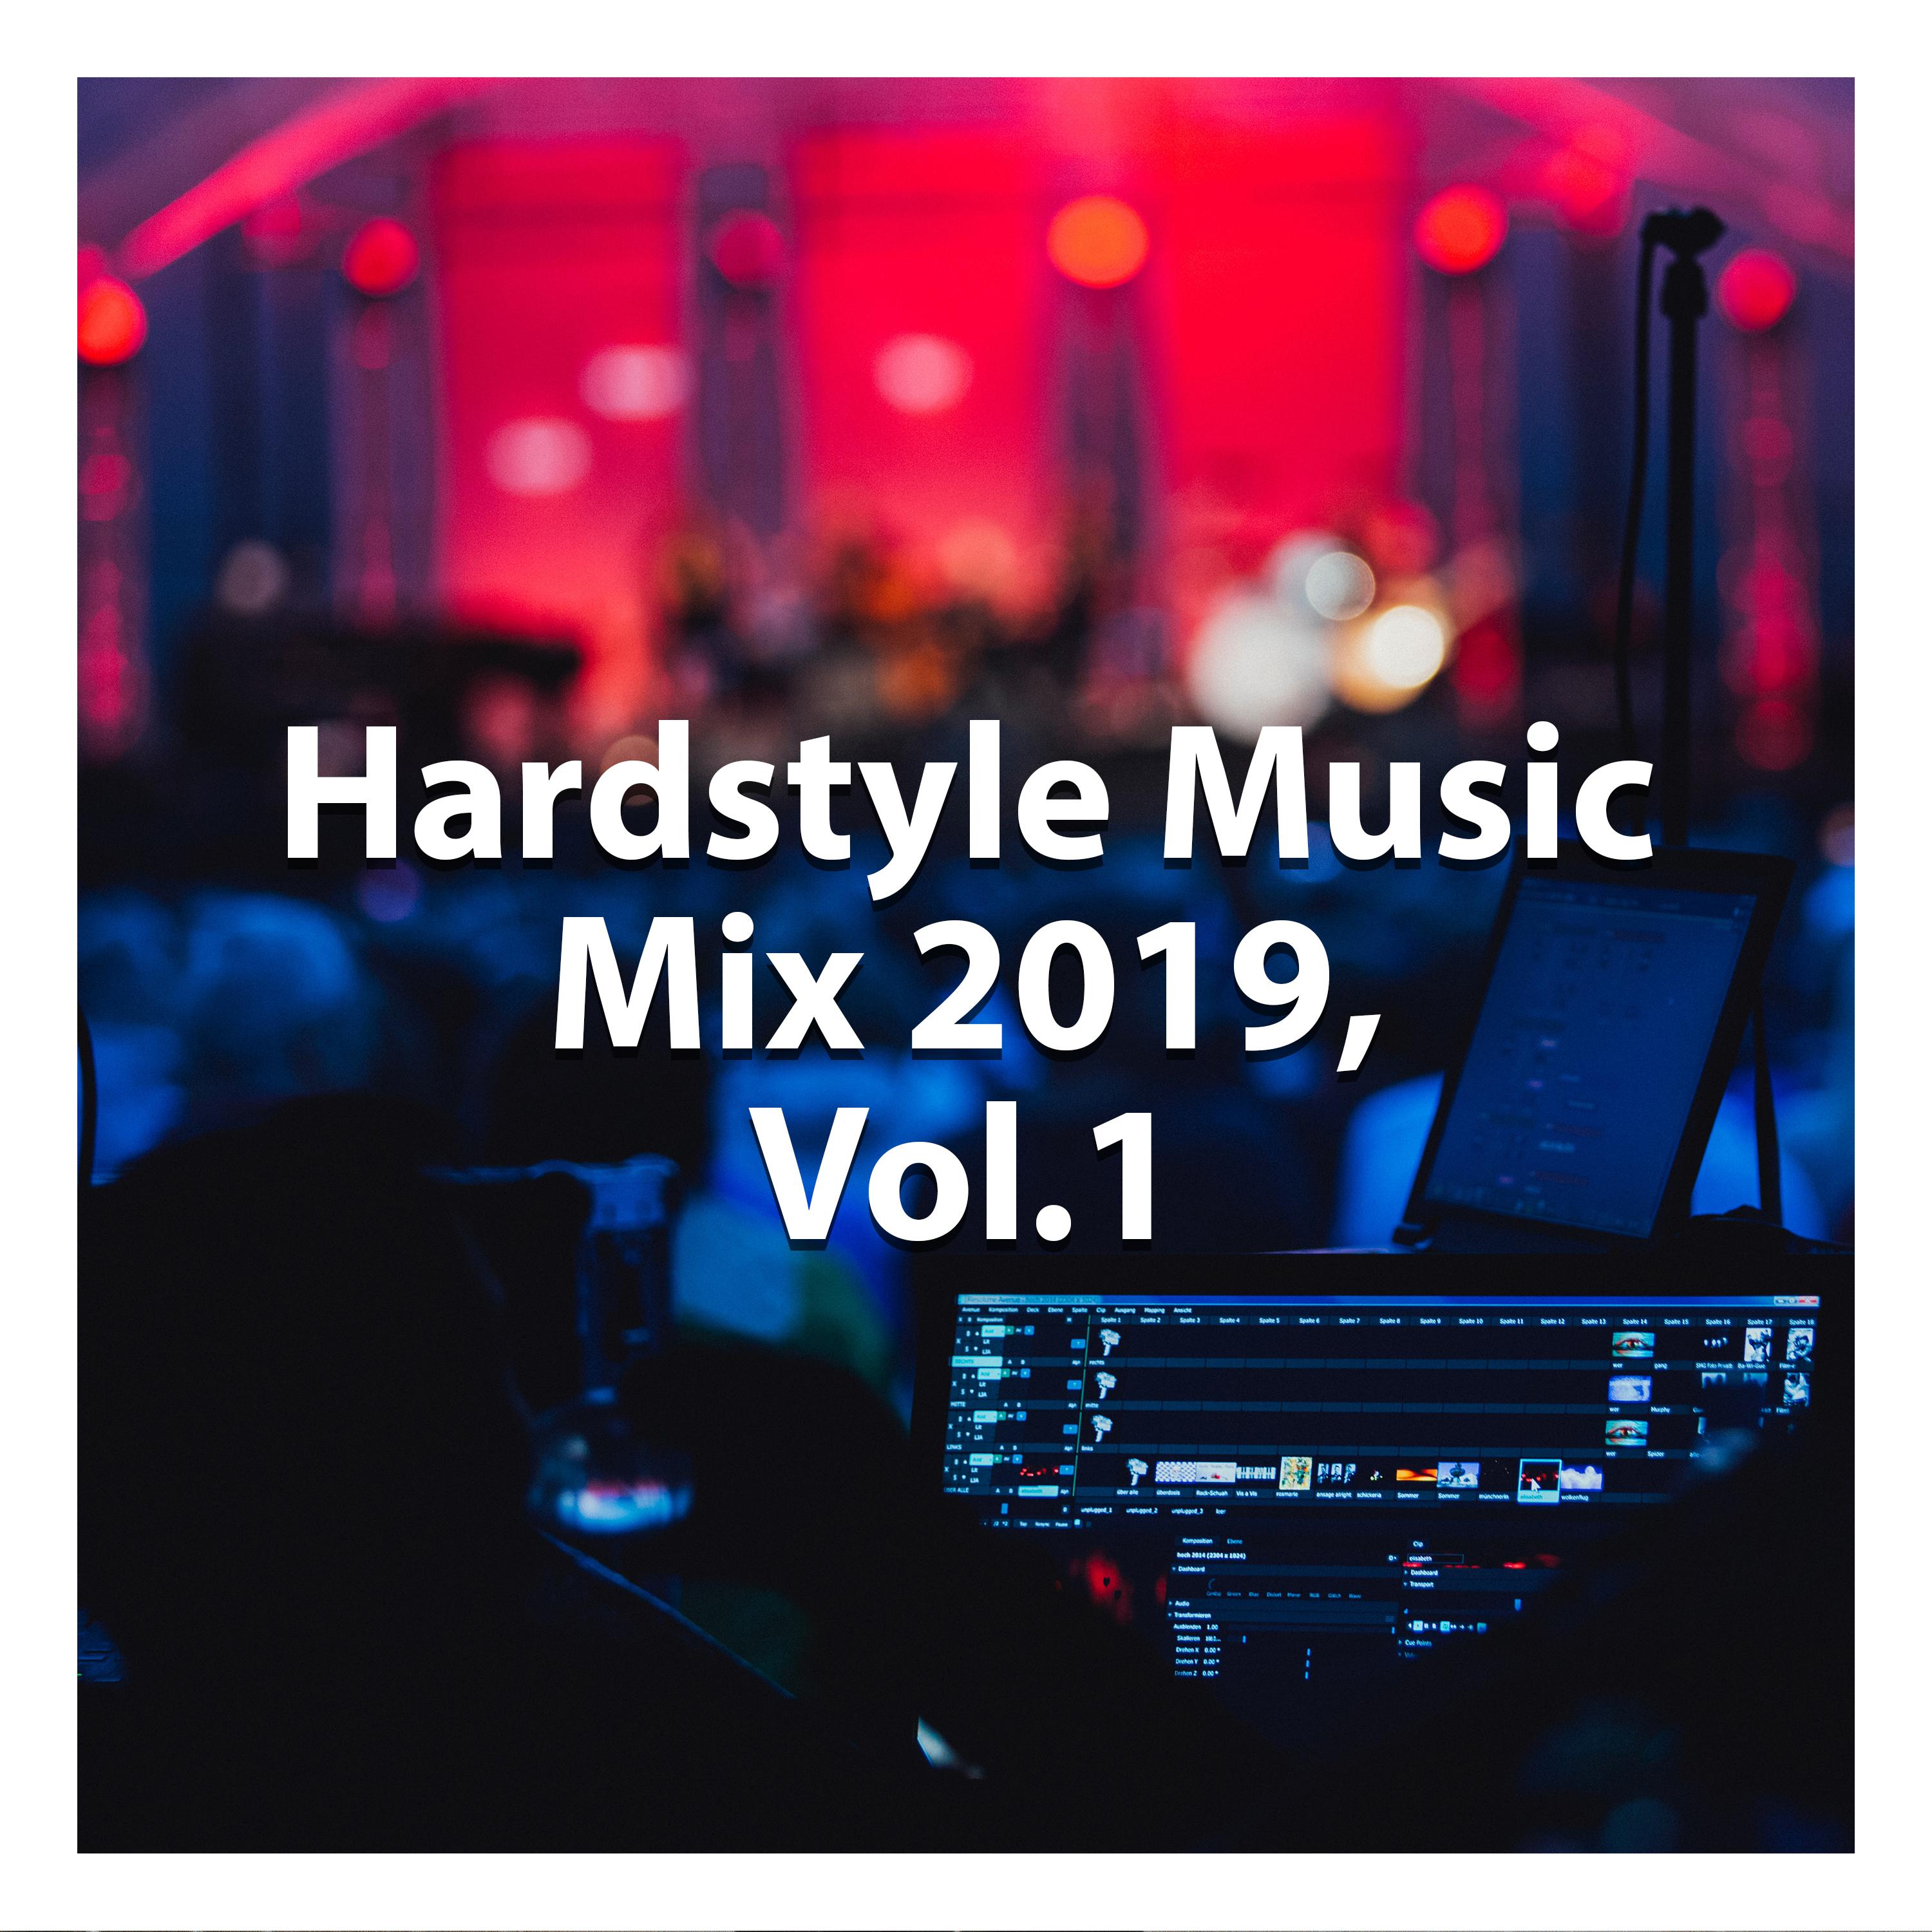 Hardstyle Music Mix 2019, Vol. 1